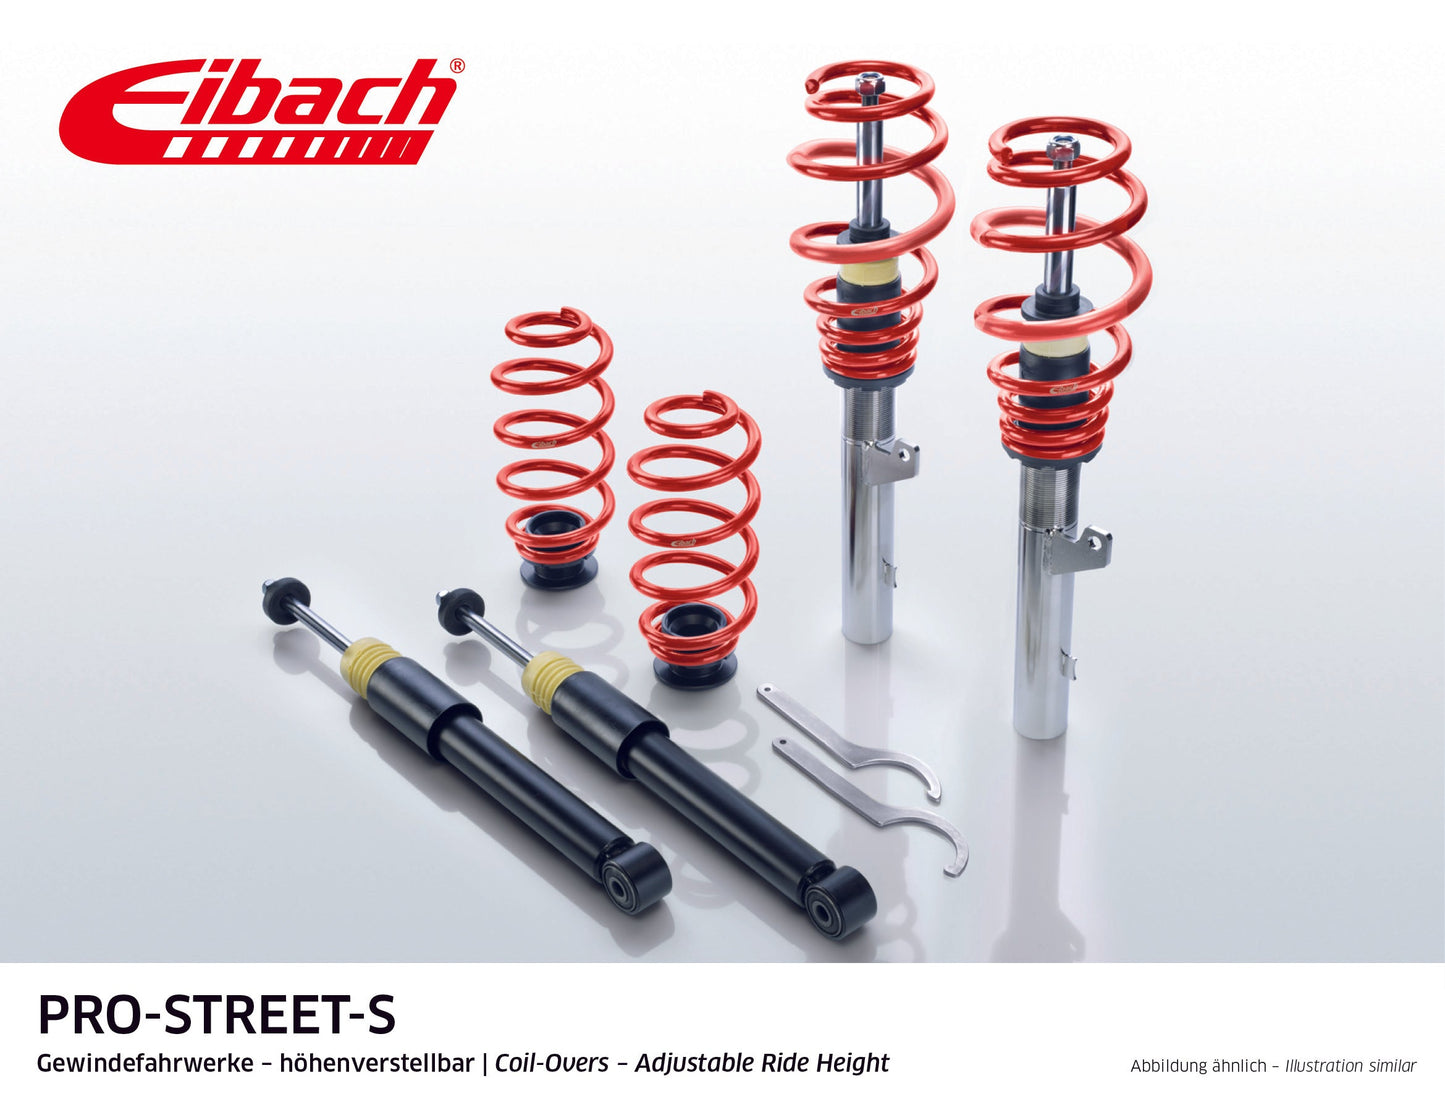 Eibach Pro-Street Coilover (PSS65-15-013-02-22) at £995.69